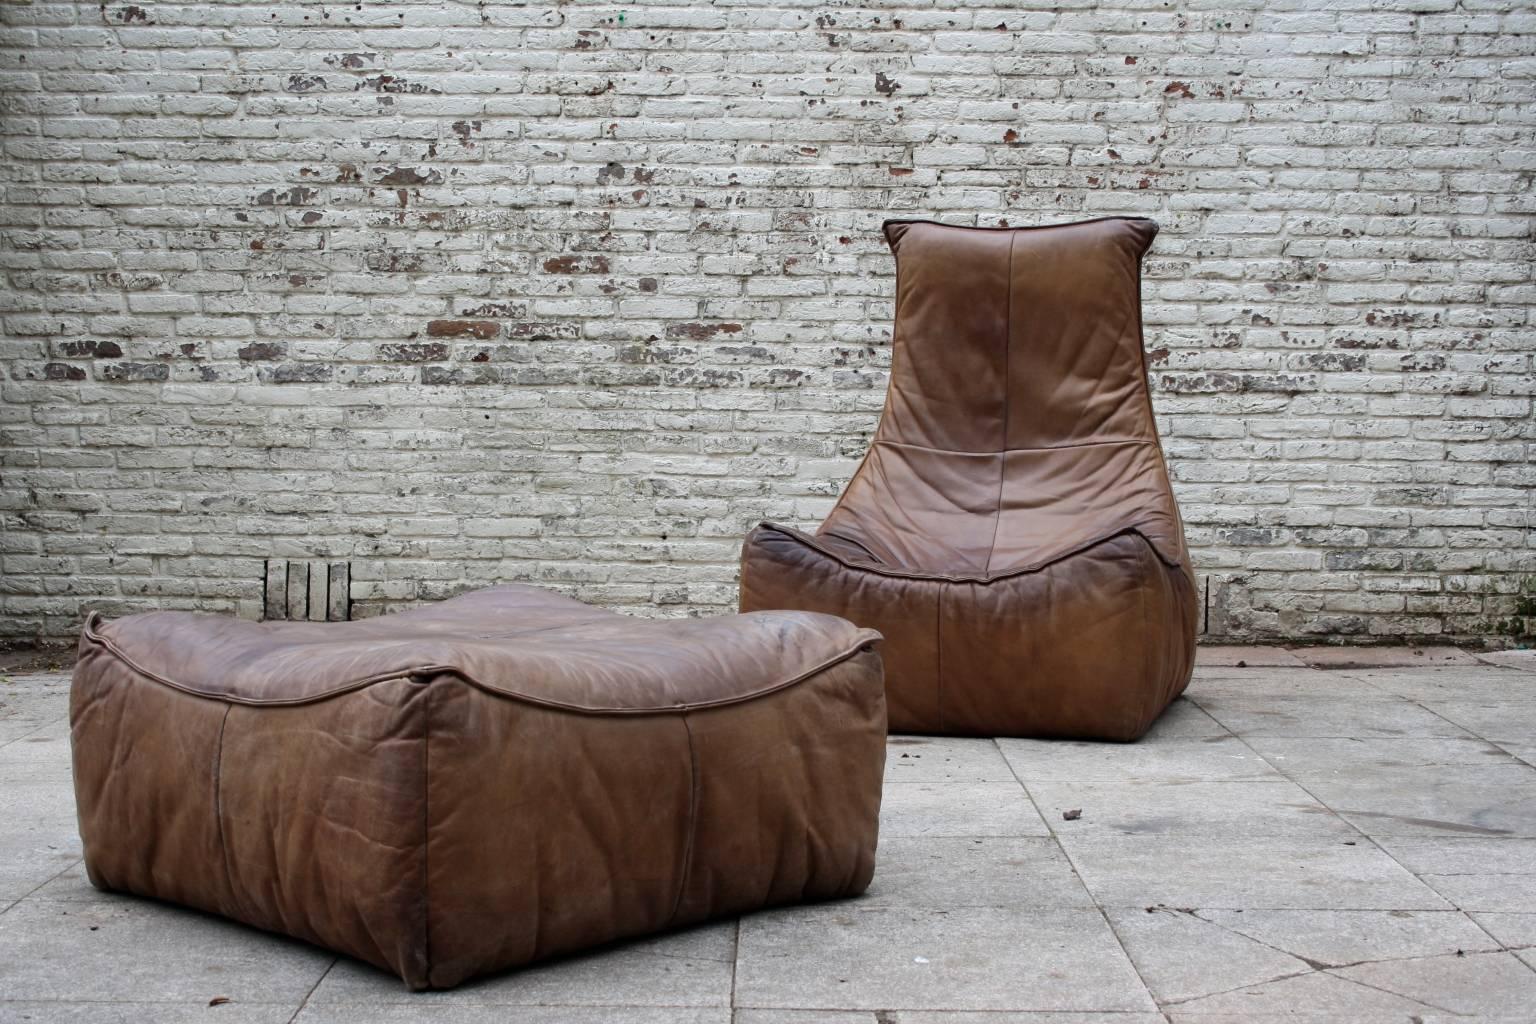 The Rock” lounge chair and ottoman by Gerard Van Den Berg for Montis, Dutch, 1970s.

In our opinion one of the most iconic and beautiful Dutch lounge chairs. This lounge chair comes with an ottoman, which you don’t see very often. Both are